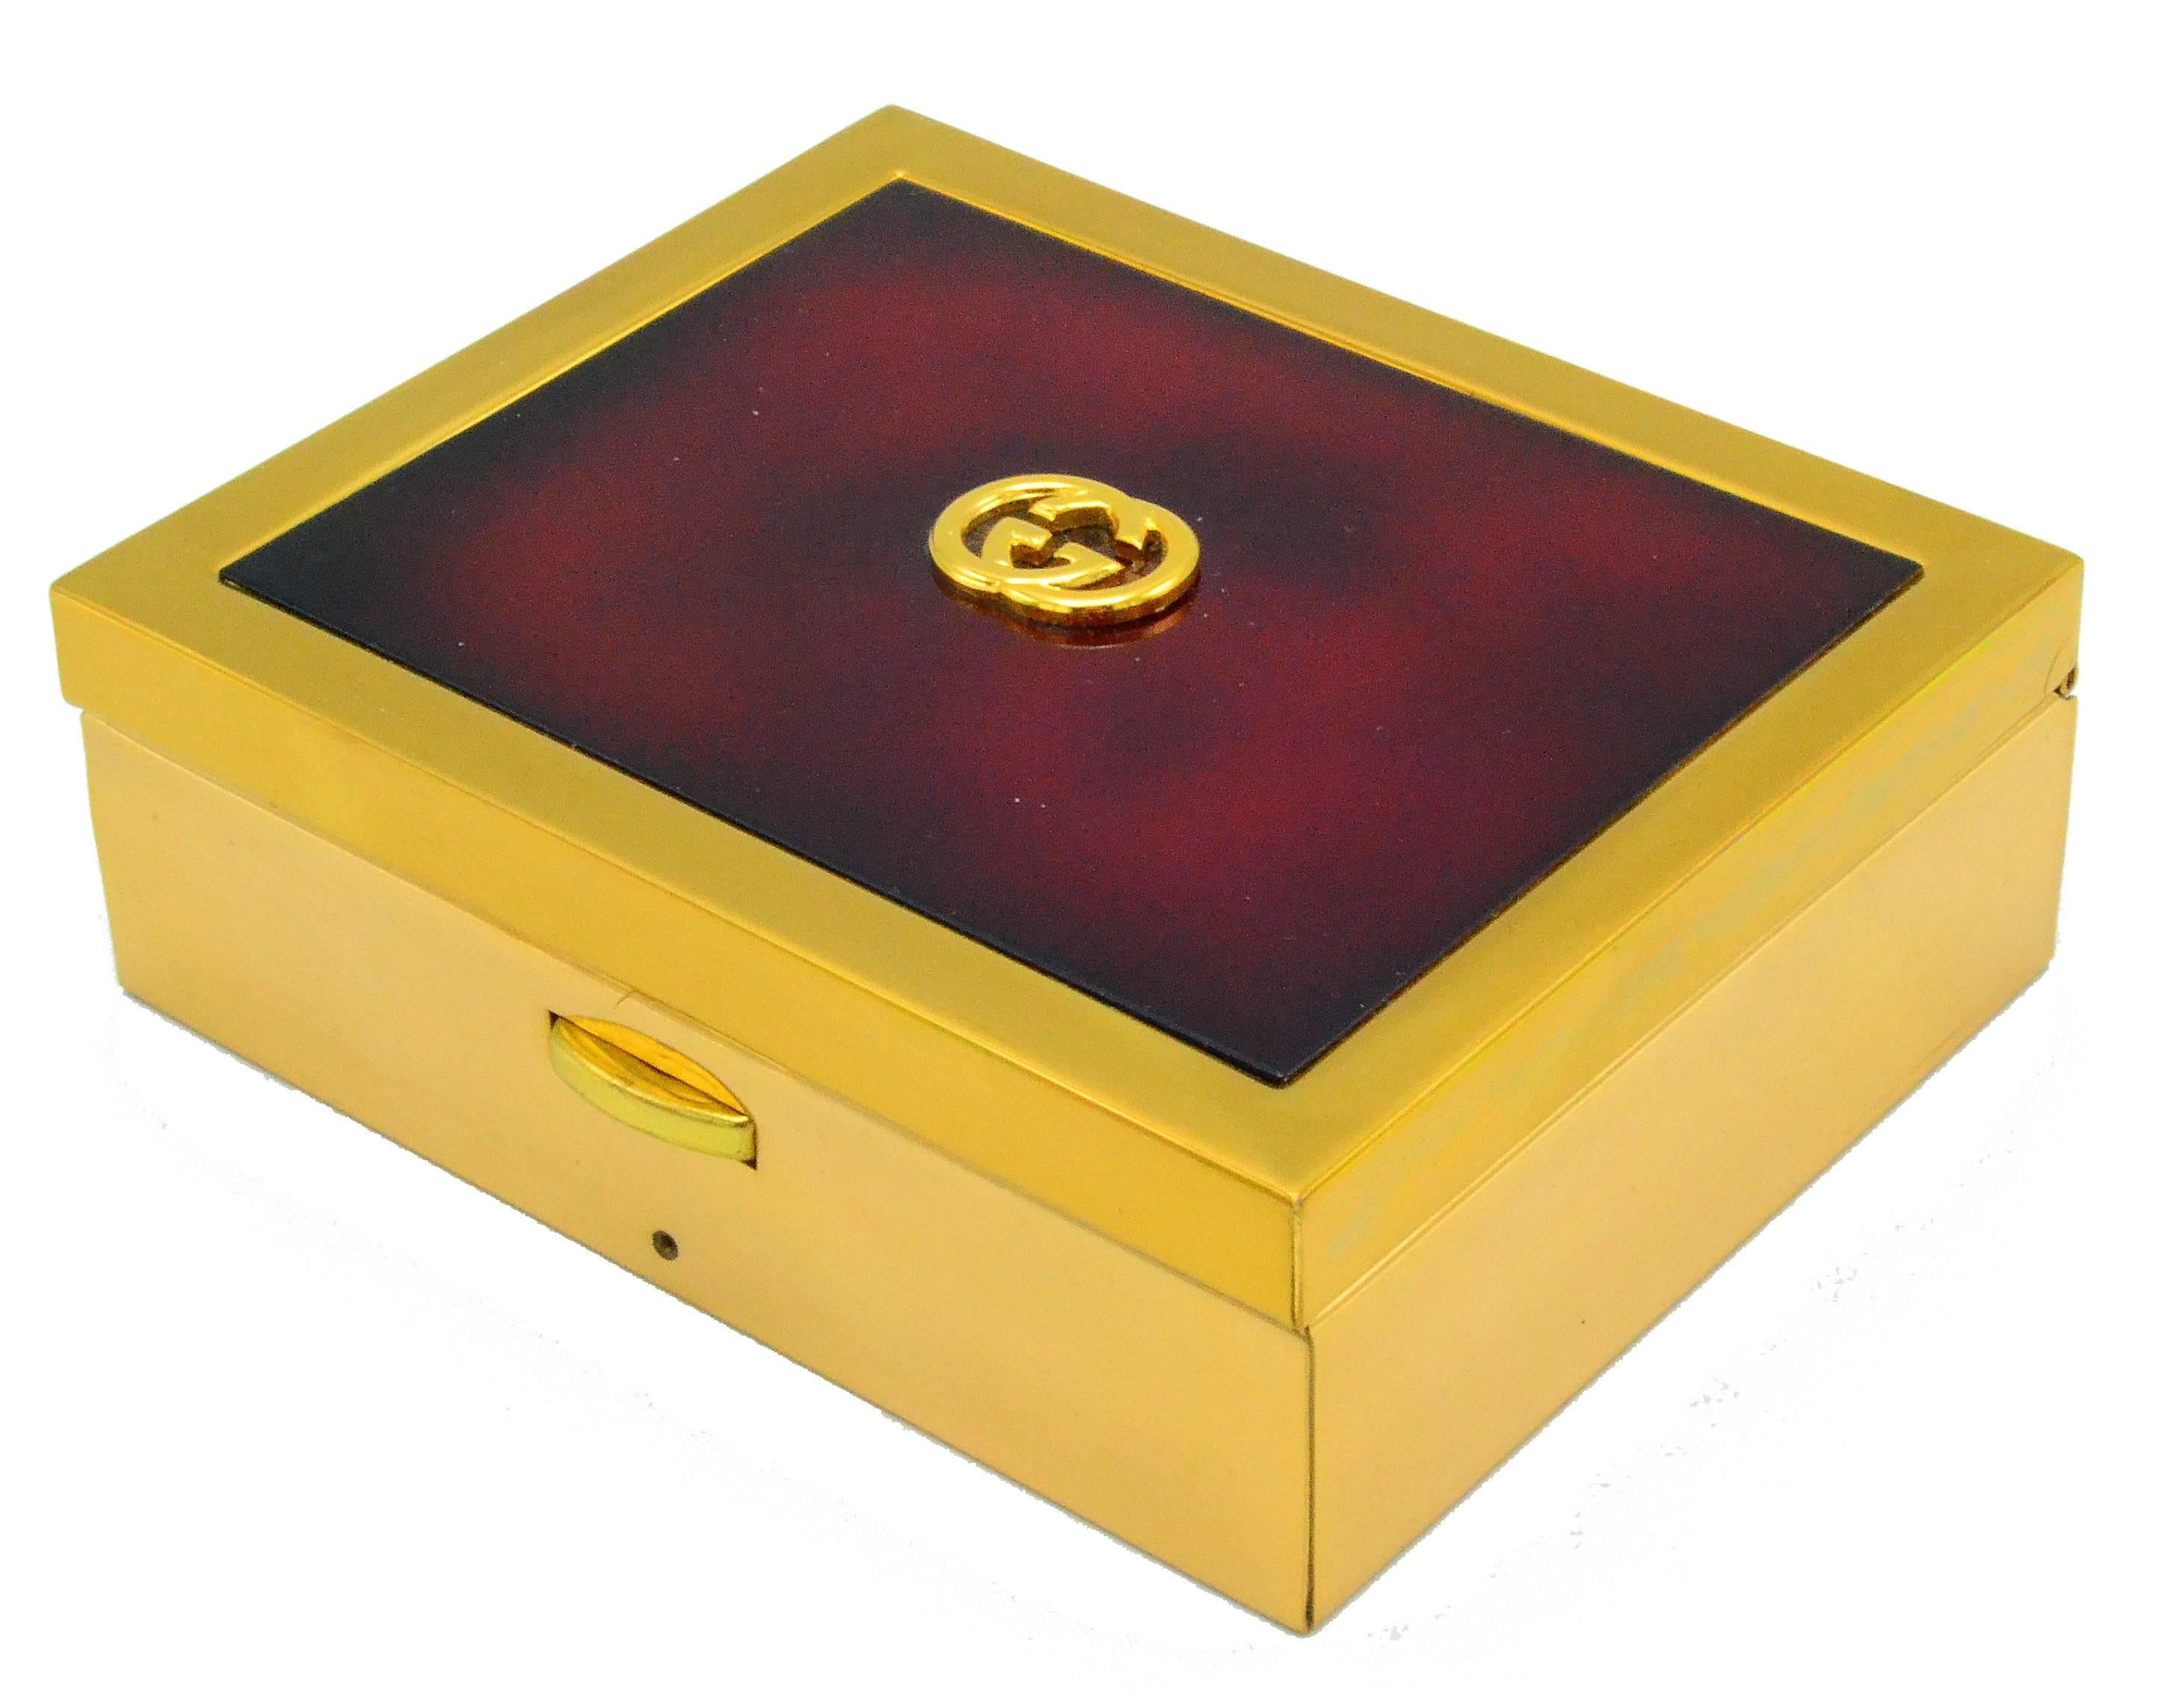 Gucci box made out of brass and wood.
Marked inside with Gucci Italy.